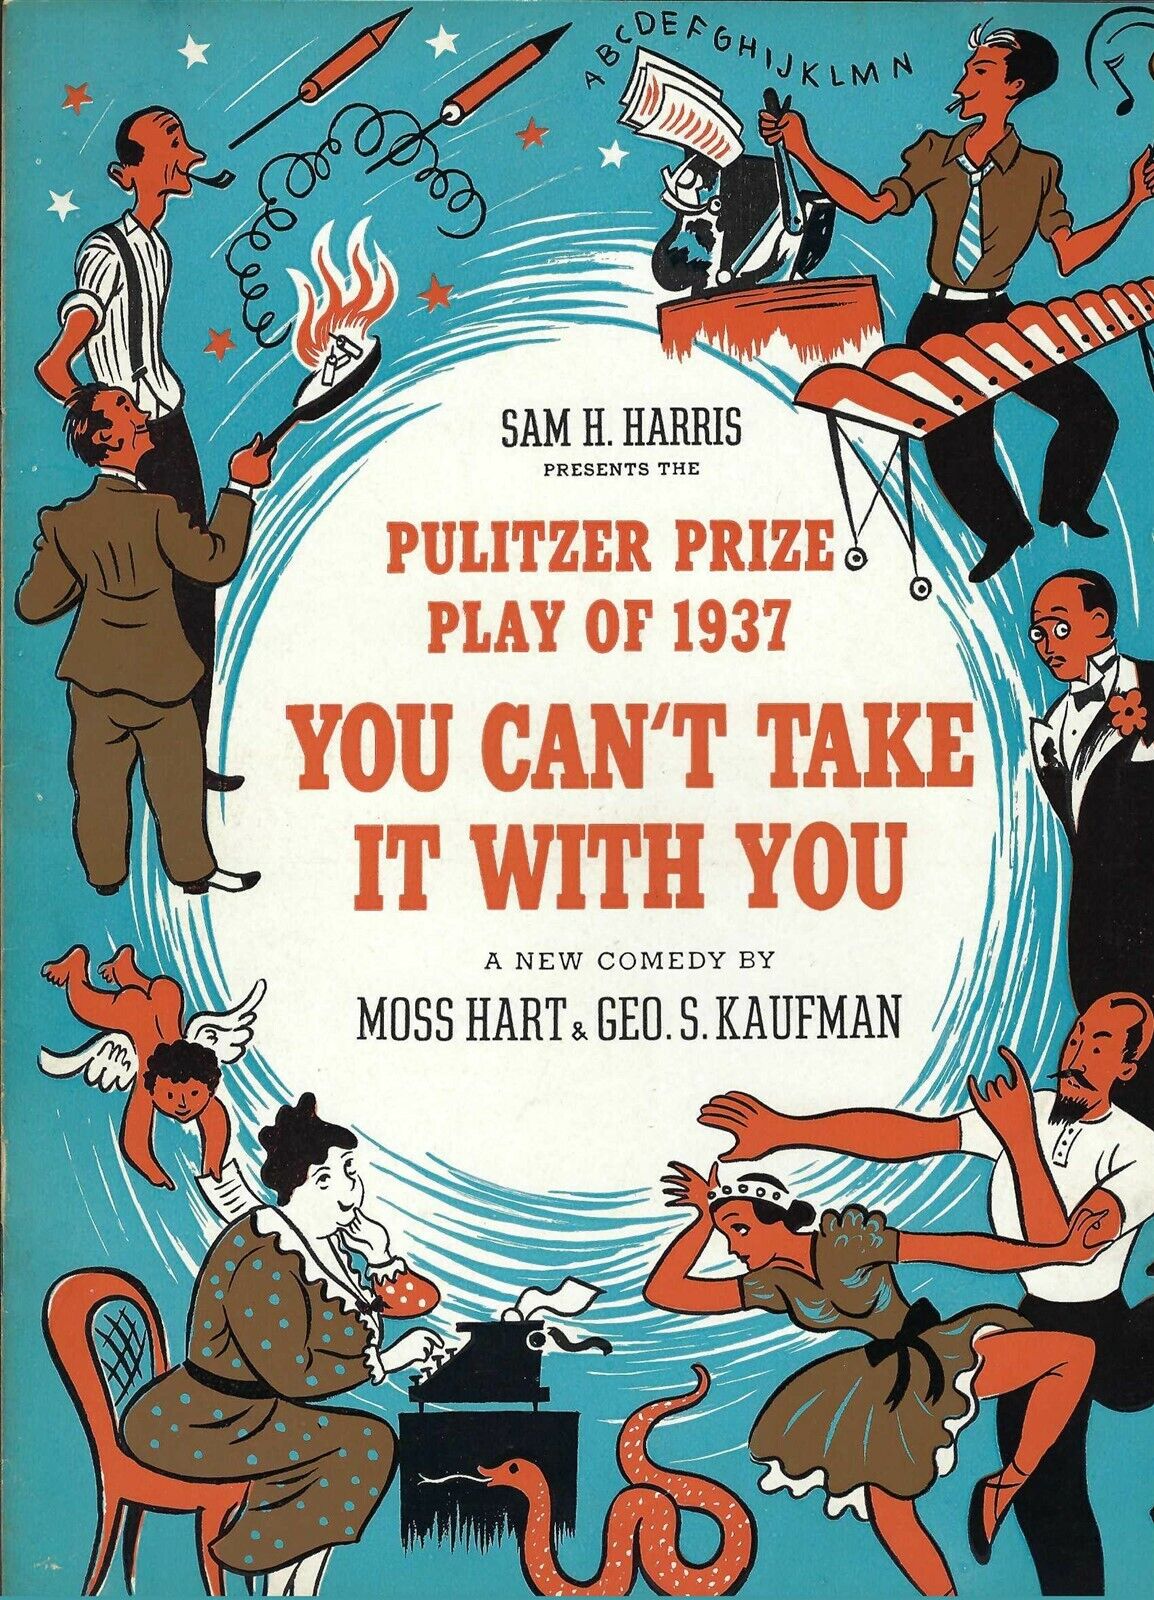 You Can't Take It With You Souvenir Program, Moss Hart, George S. Kaufman, 1937